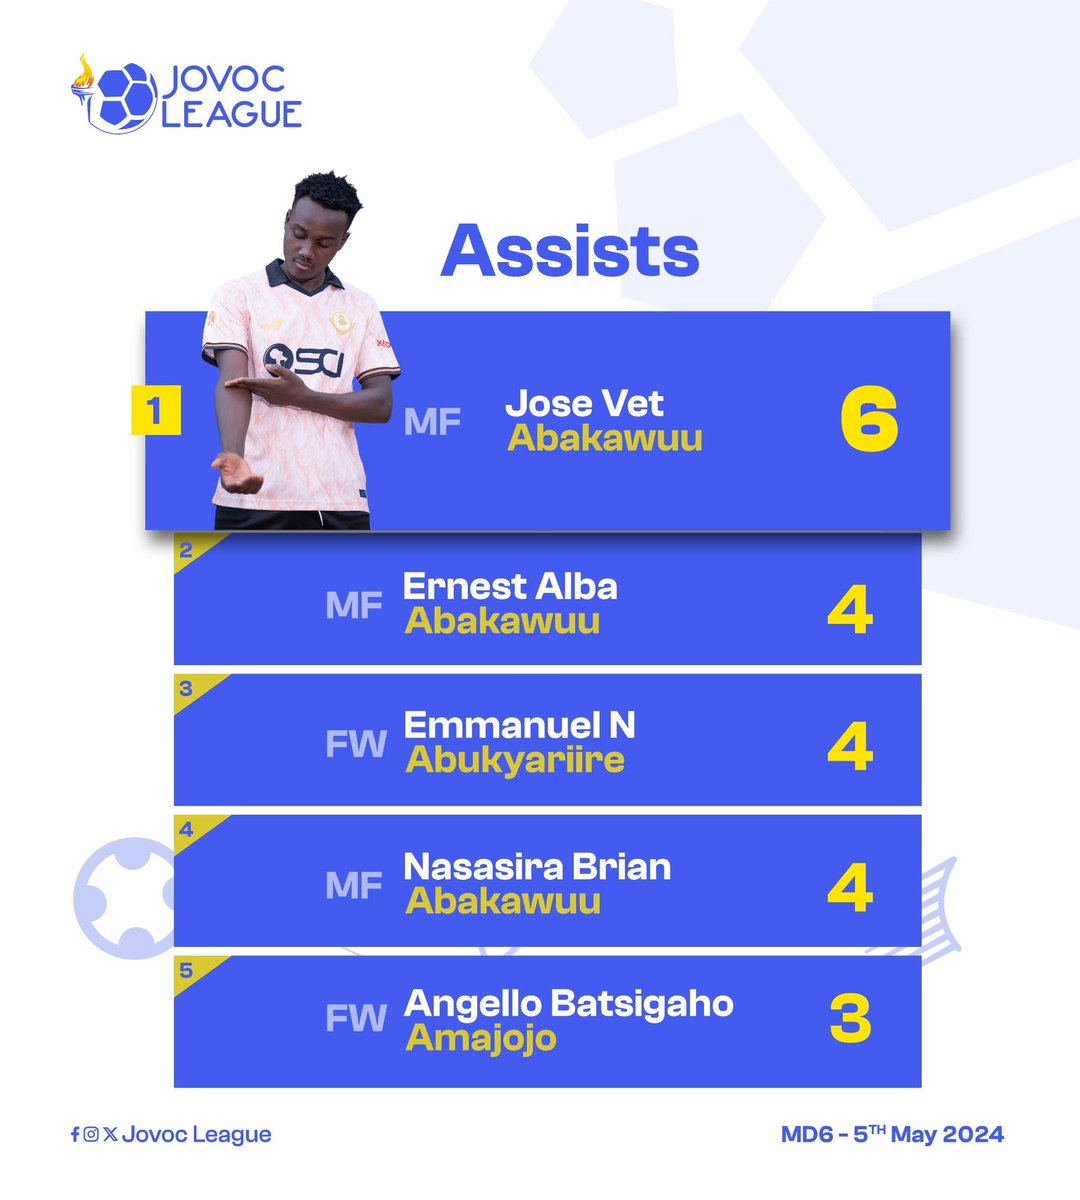 'HARD WORK BEATS TALENT IF TALENT DOESN'T WORK HARDER'

Frame1: 3 of our players made it to team of the week MD6
Frame2: Top scorer is ours ✍️ 
Frame3: Cleansheet boss is ours ✍️
Frame4: Assist King is ours ✍️

Bravo team
Keep it up
Ora Et Labora
#HembaGwake